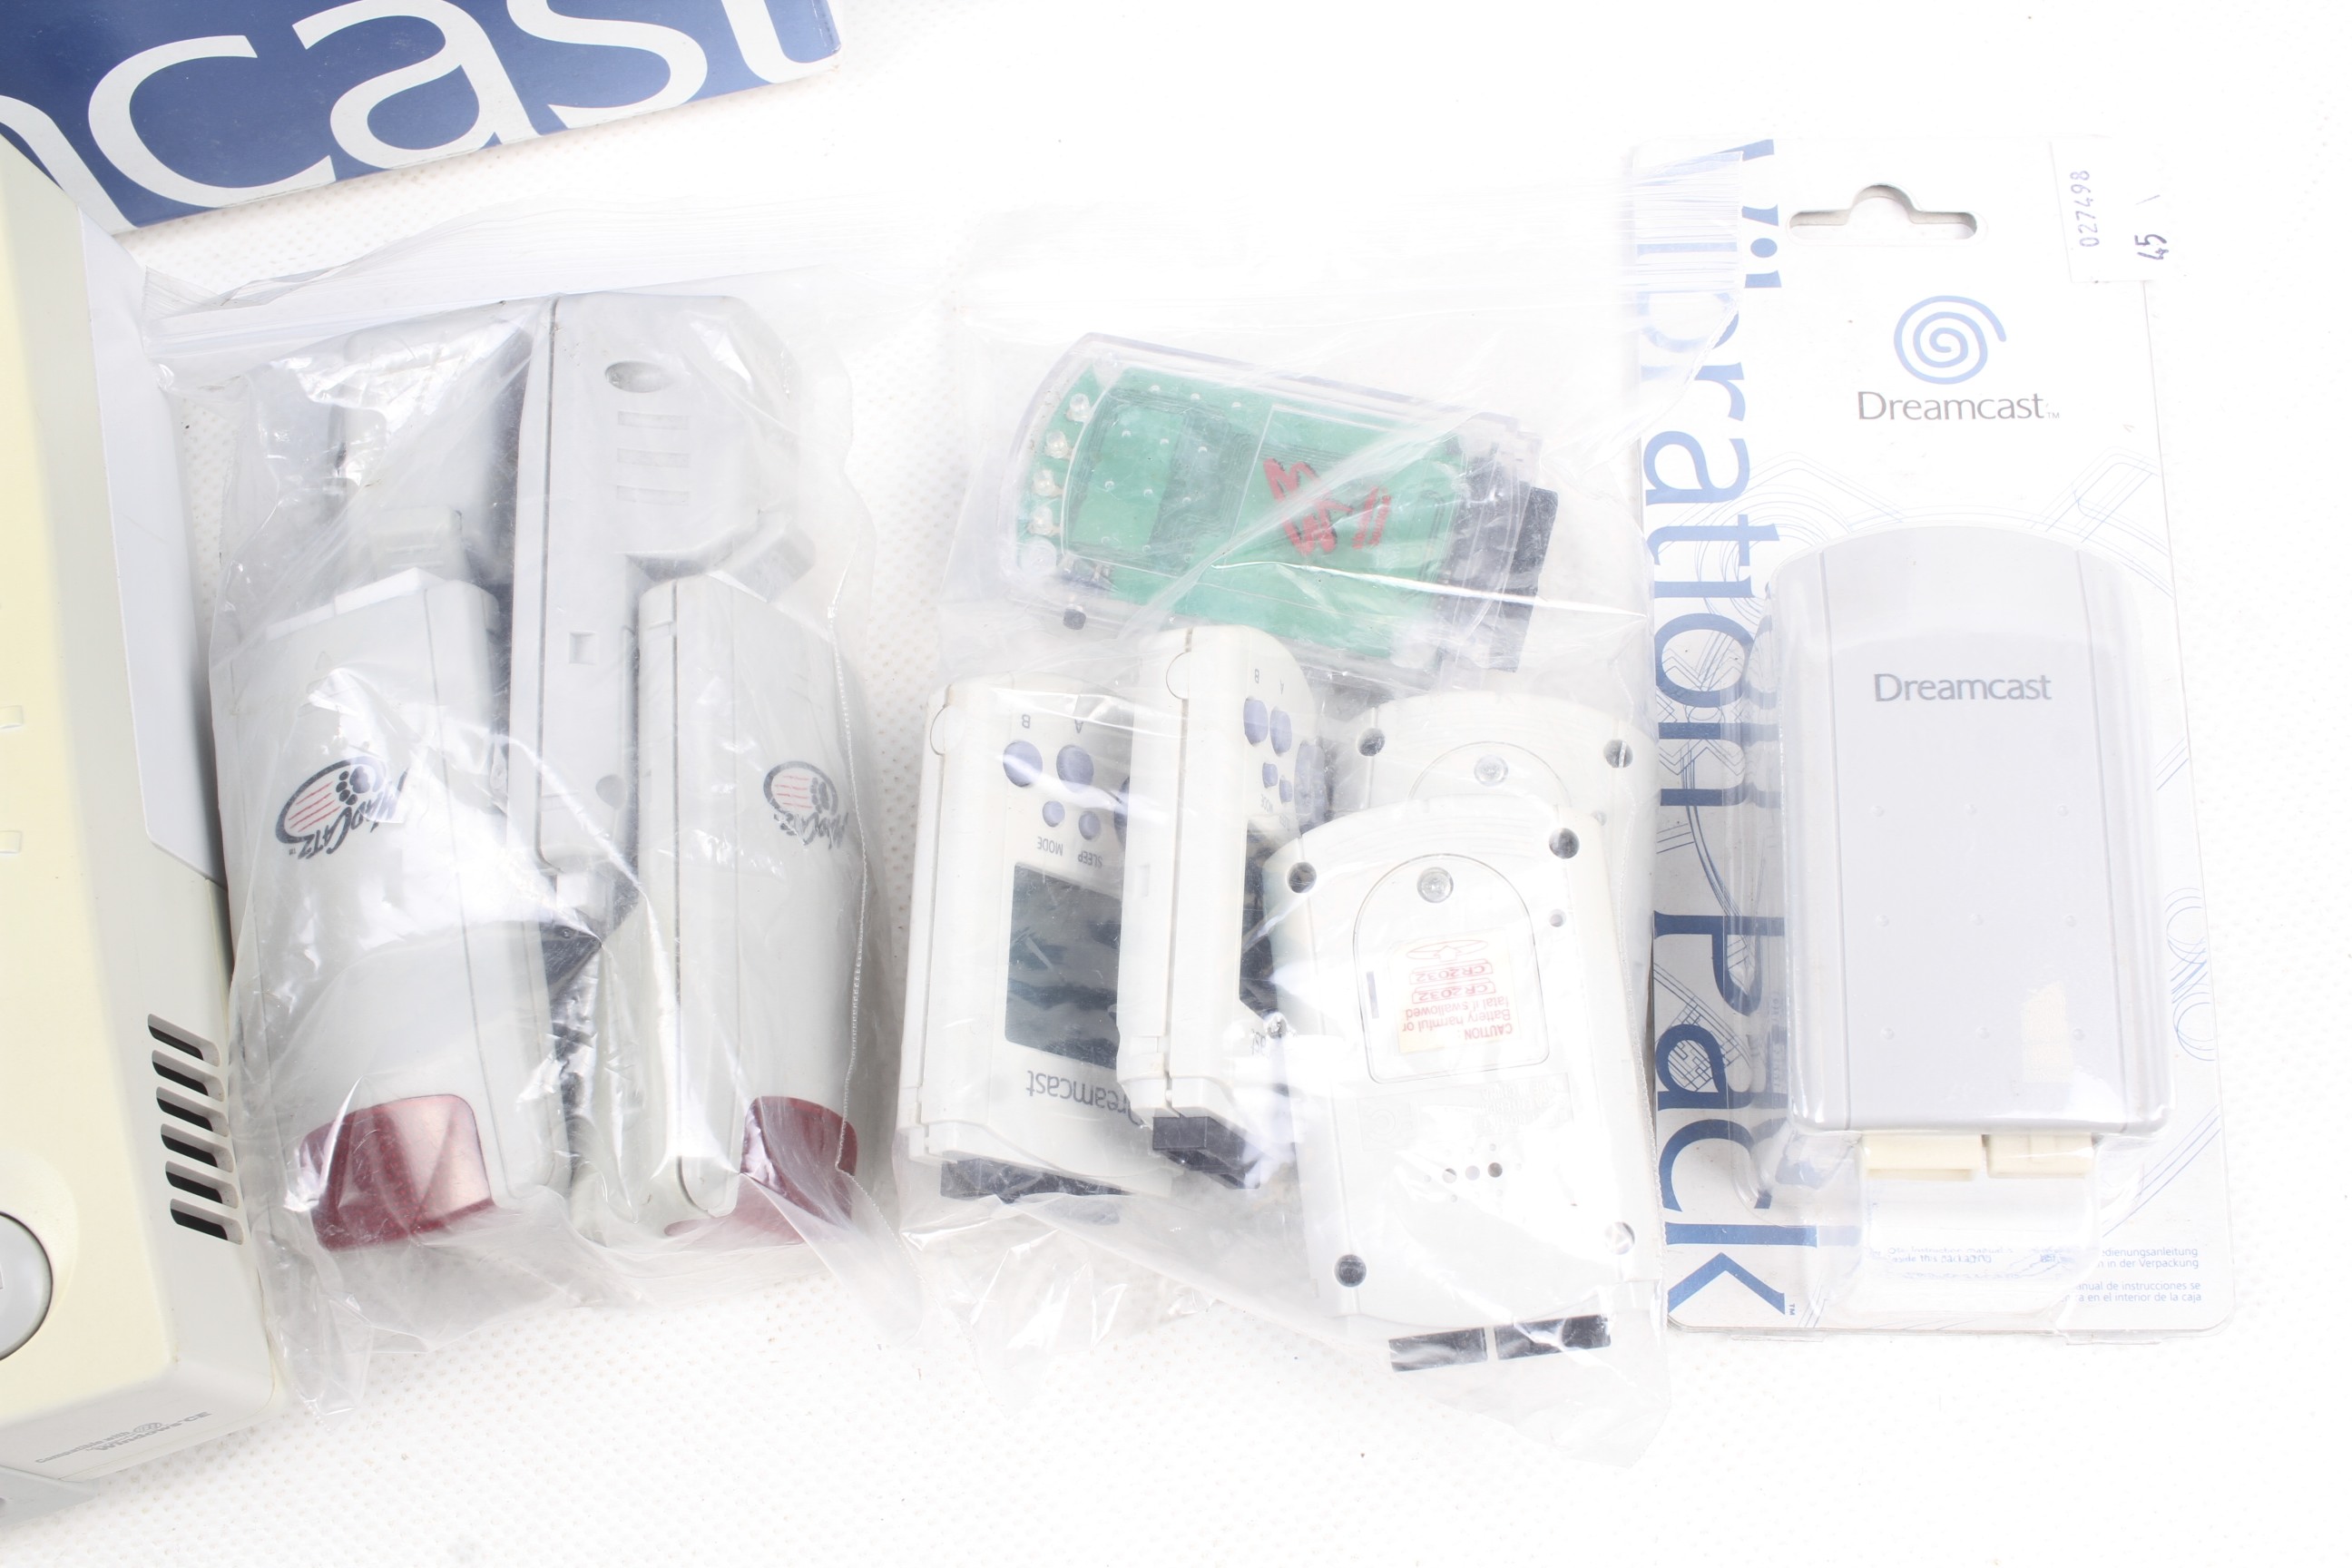 A Sega Dreamcast games console and accessories. - Image 2 of 2